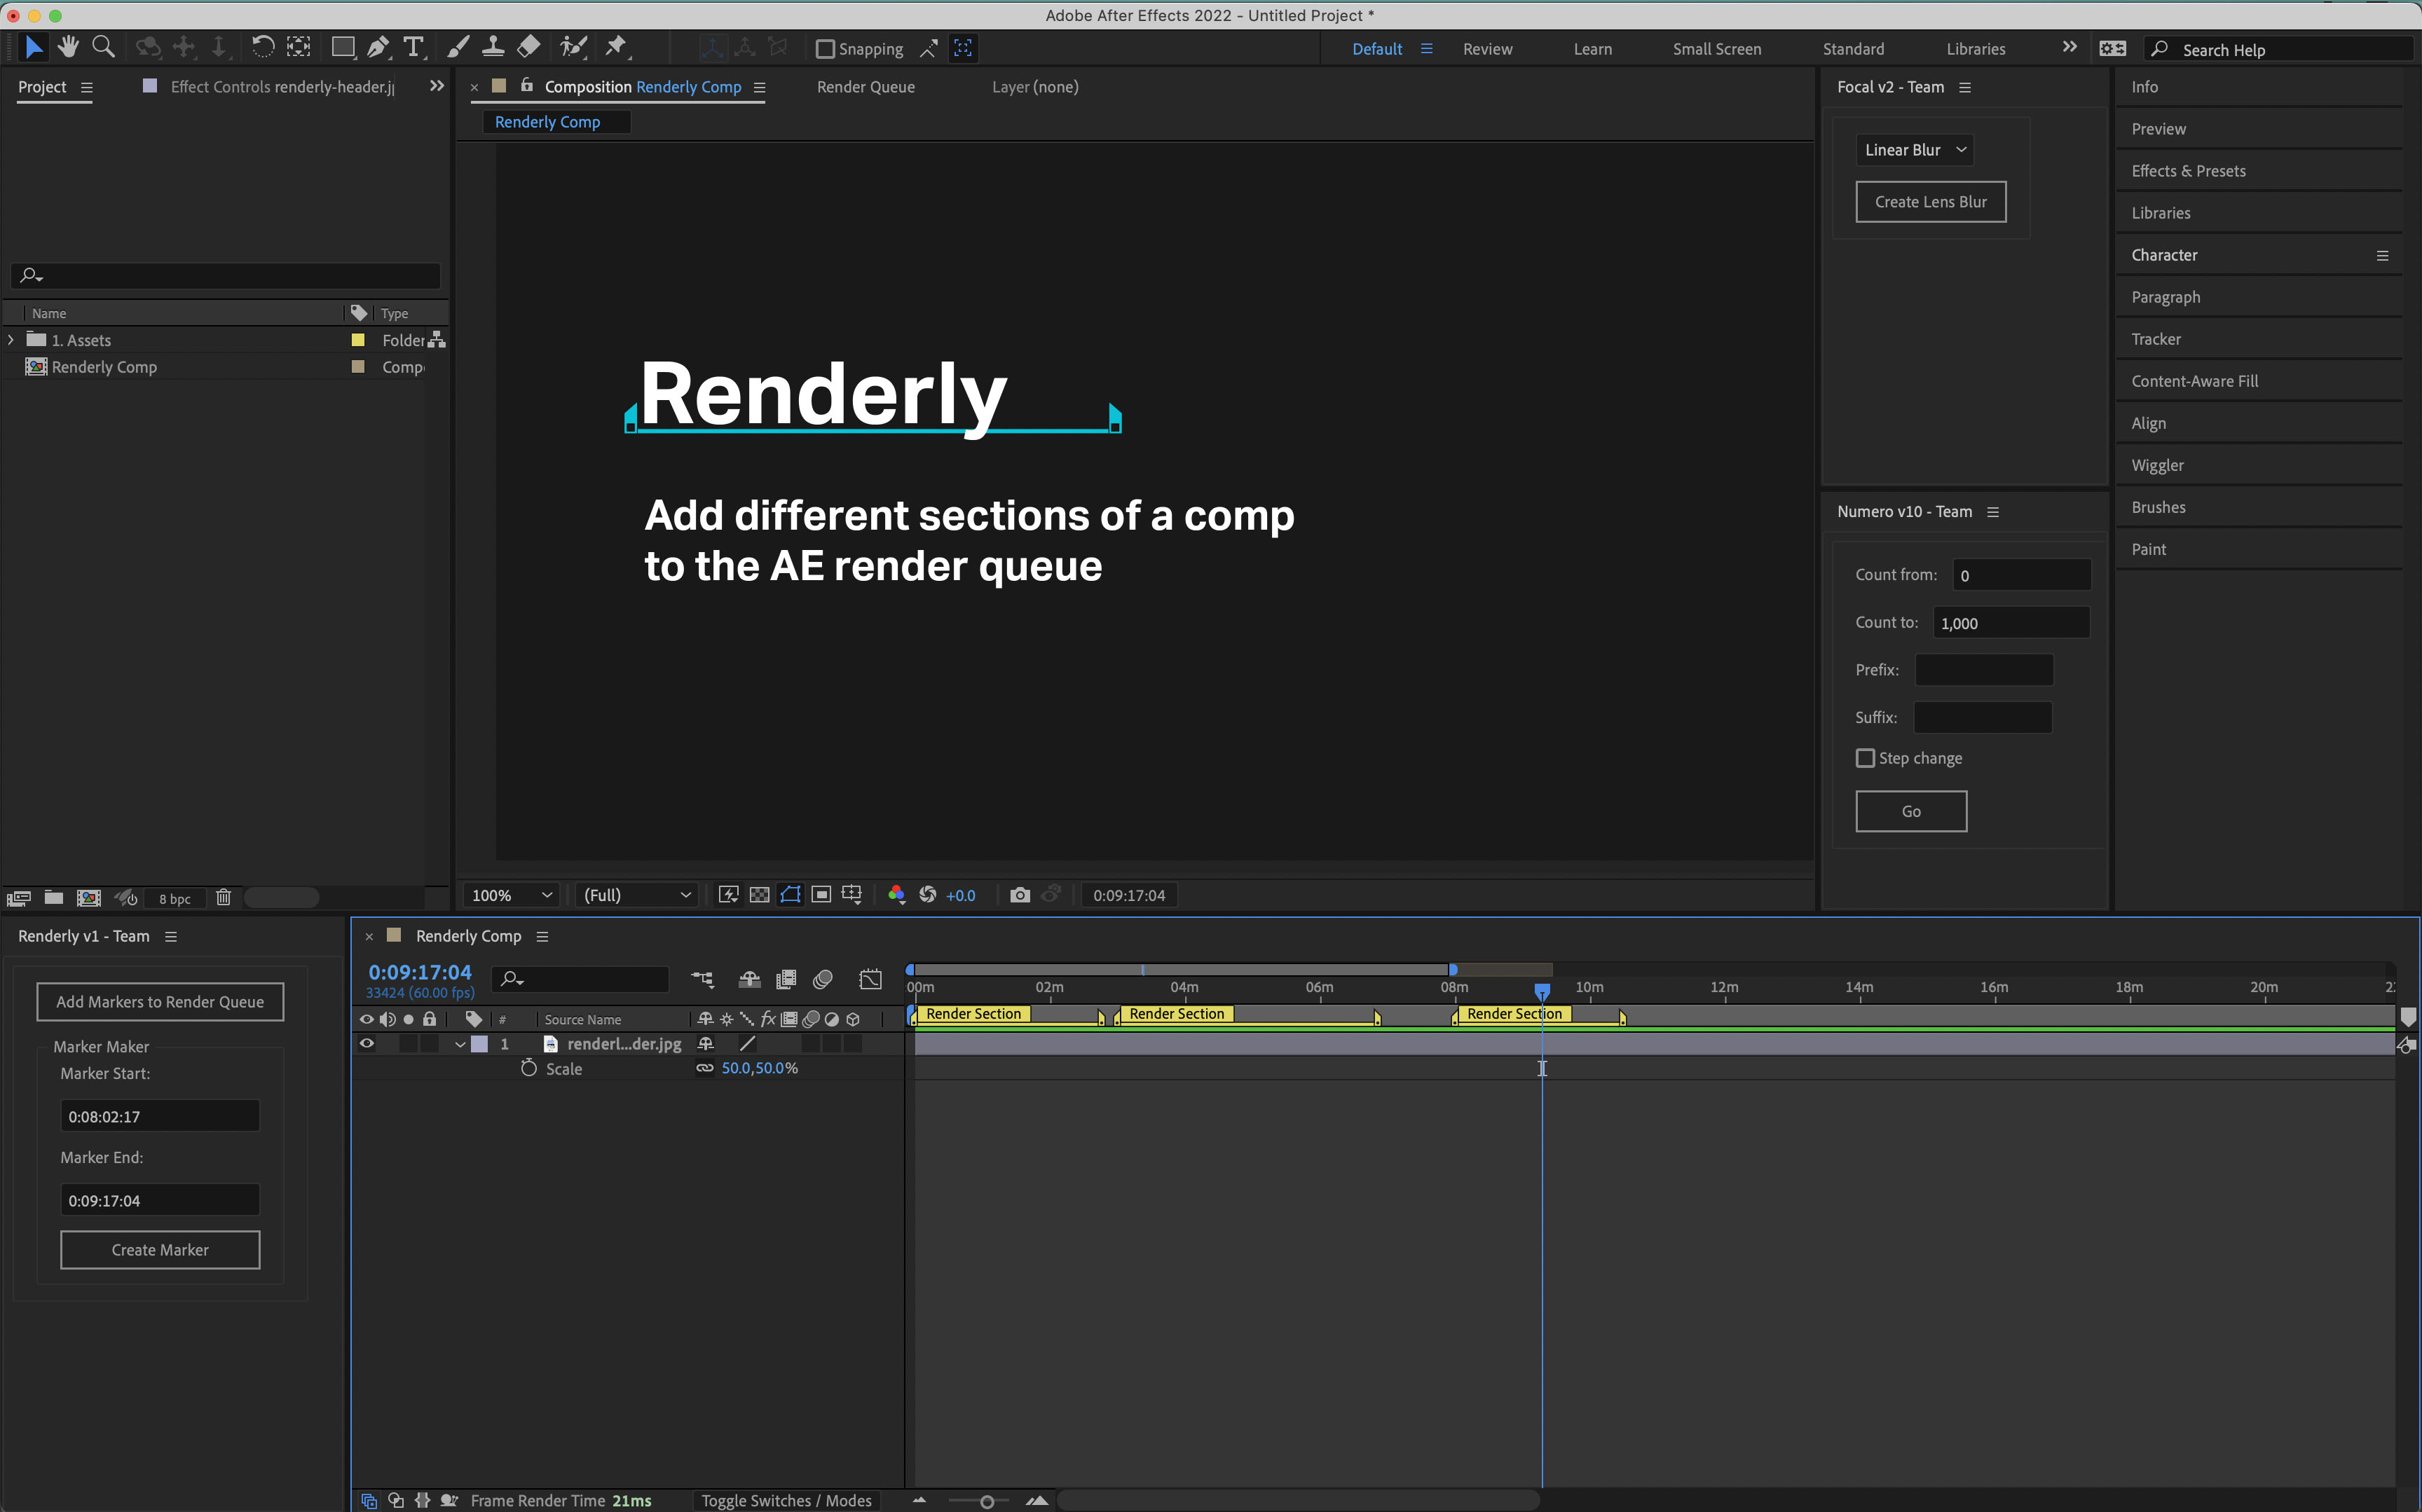 After Effects with multiple render sections in the same composition